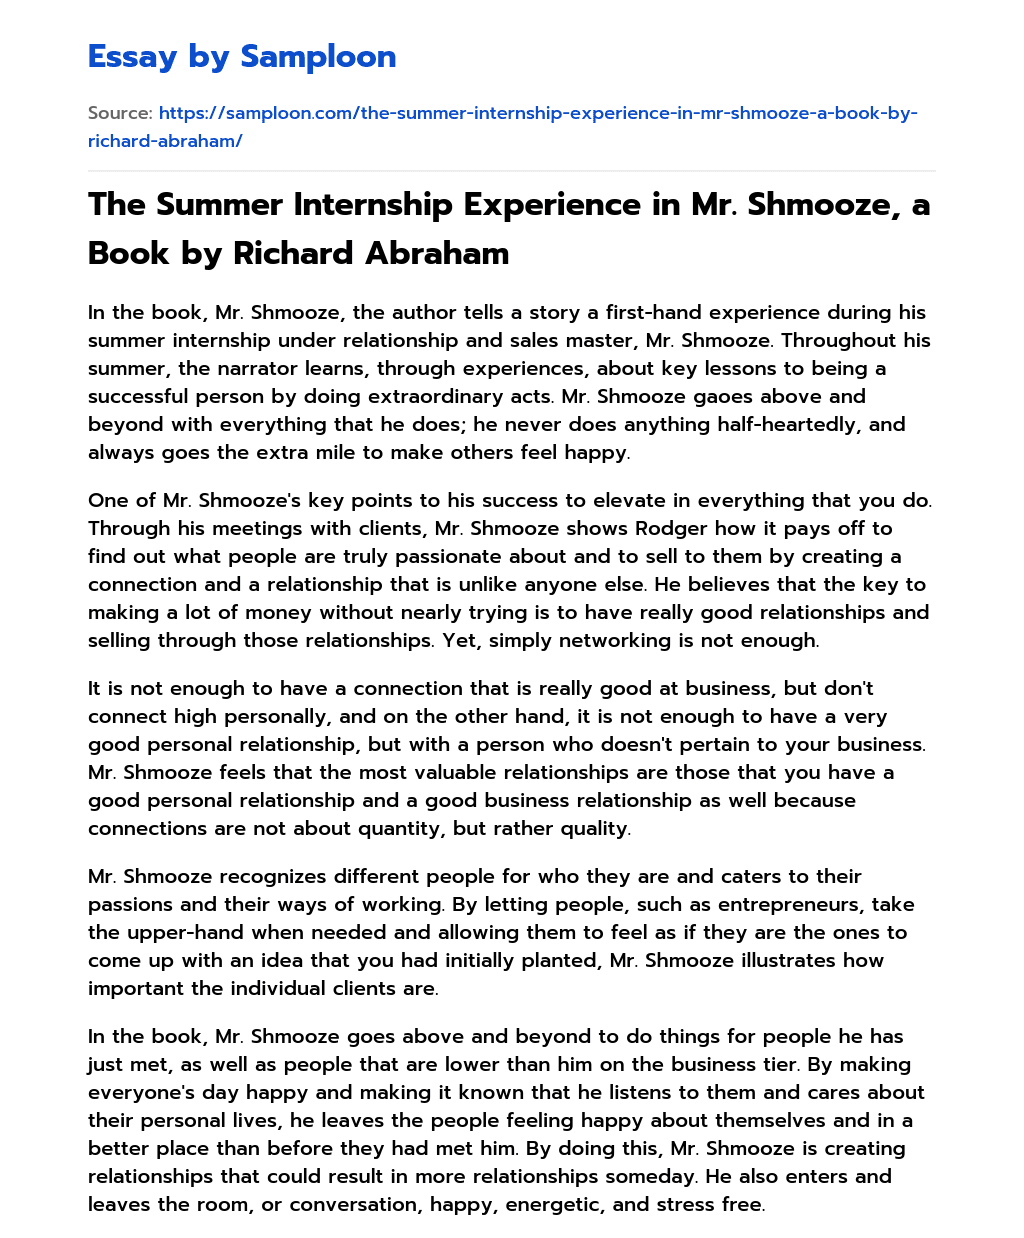 The Summer Internship Experience in Mr. Shmooze, a Book by Richard Abraham essay